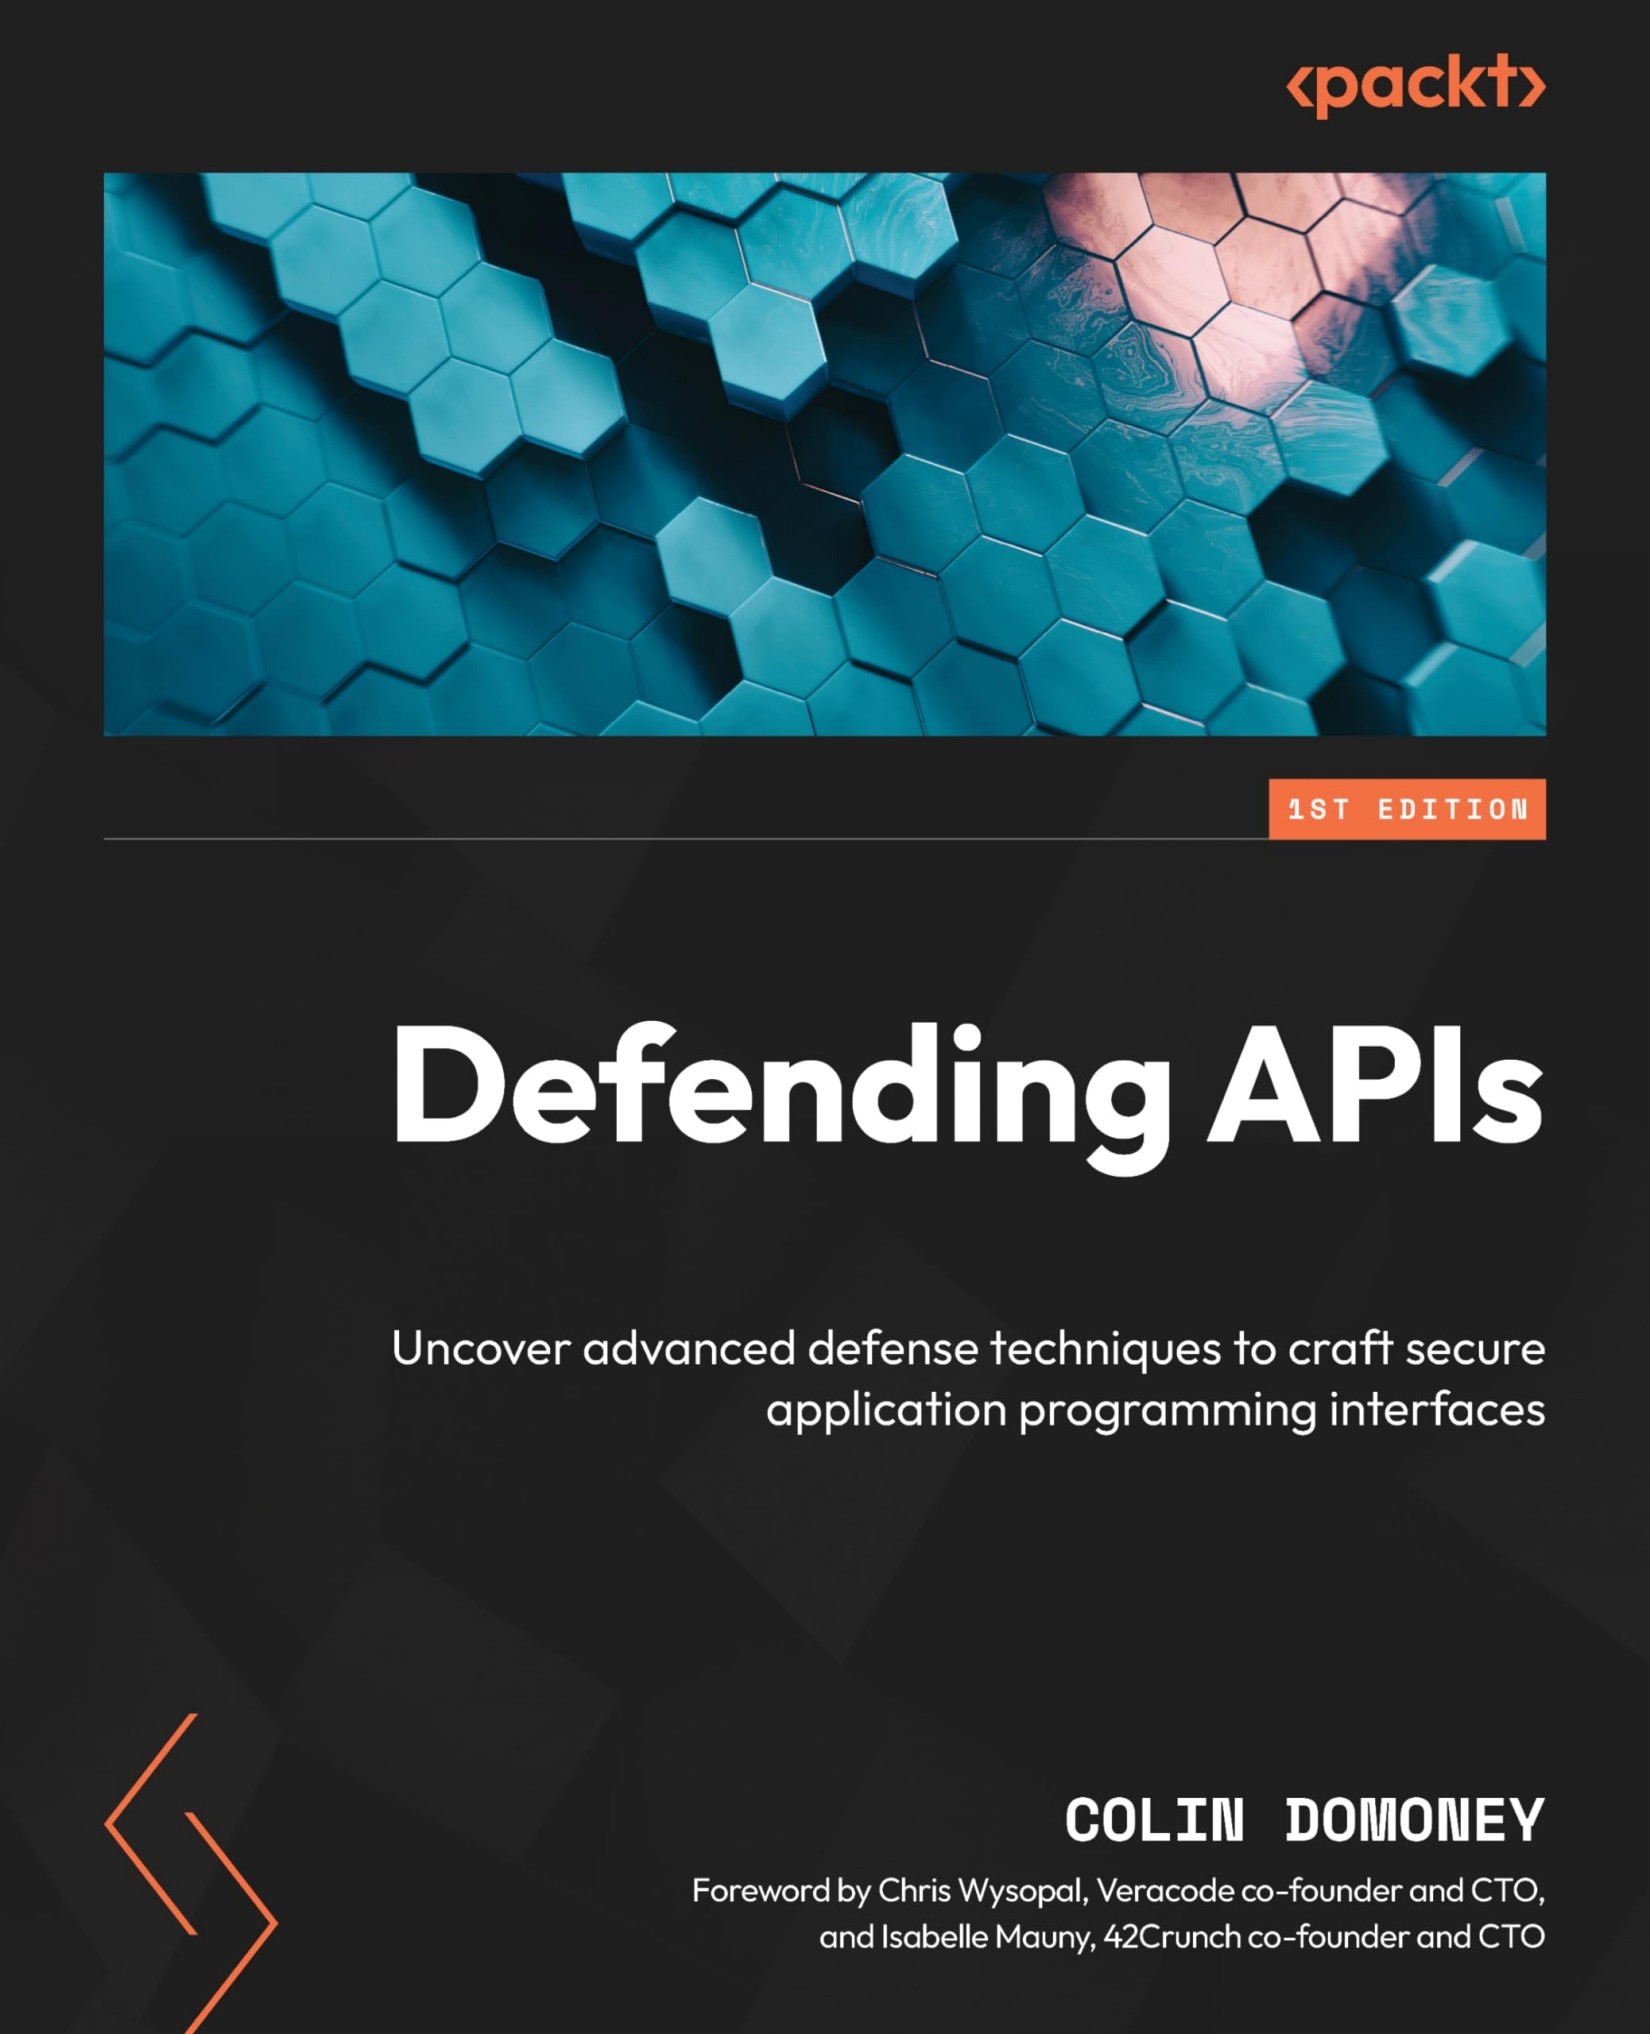 Defending APIs: Uncover Advanced Defense Techniques to Craft Secure Application Programming Interfaces